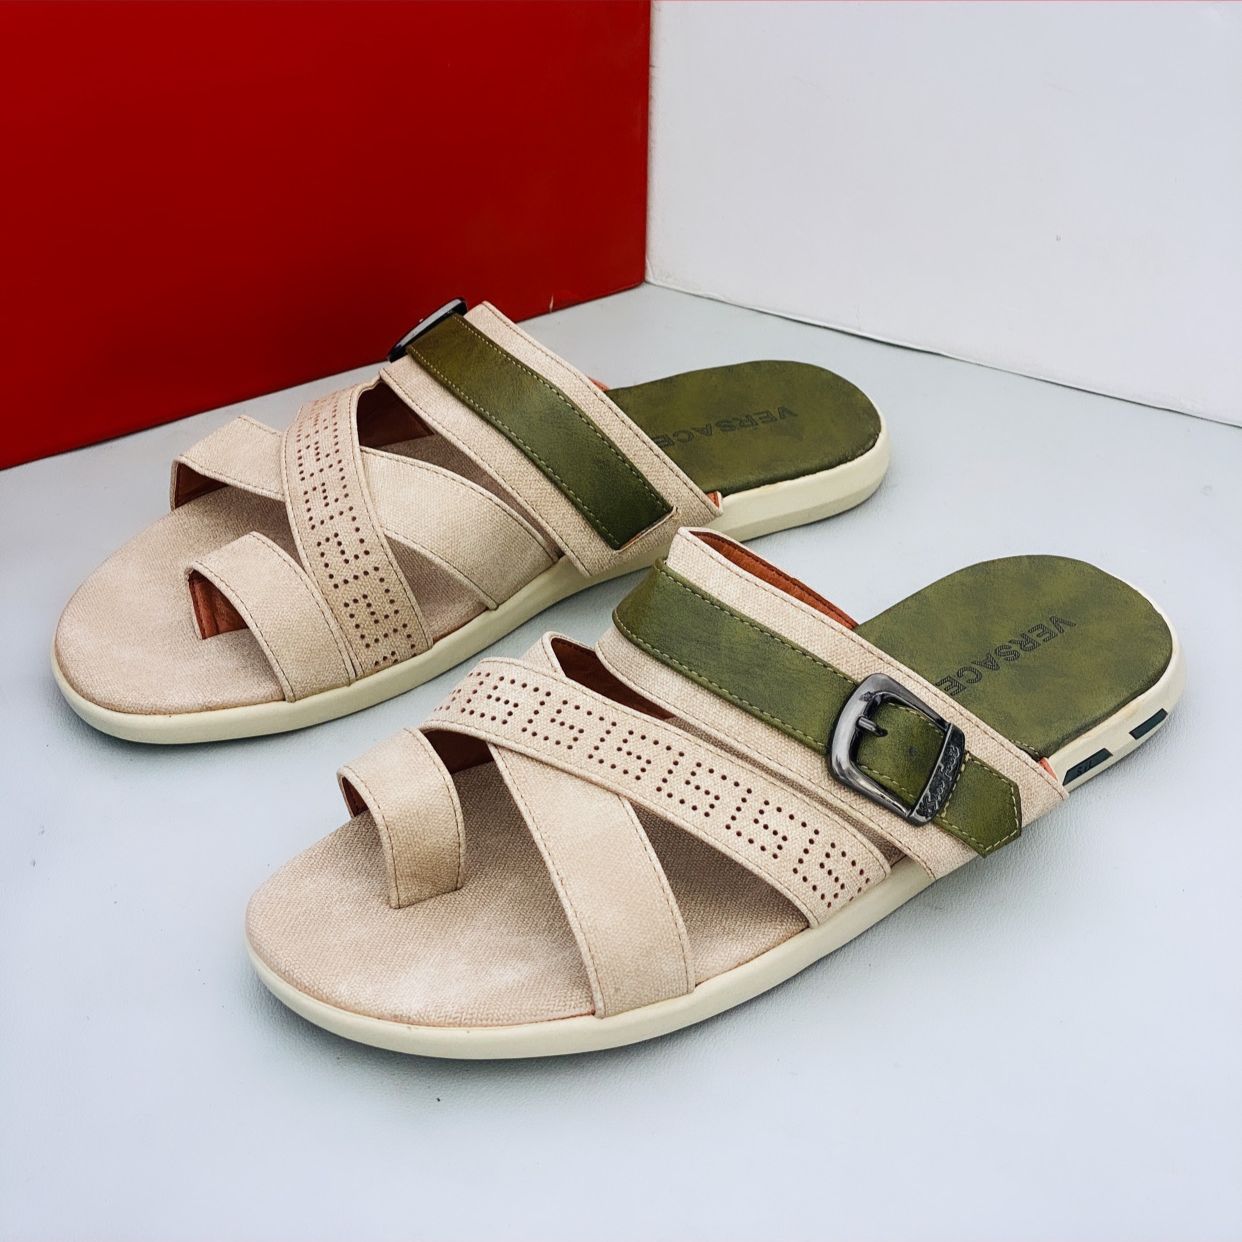 Cross Slides Sandals With Belt Buckle | Buy Online At The Best Price In ...